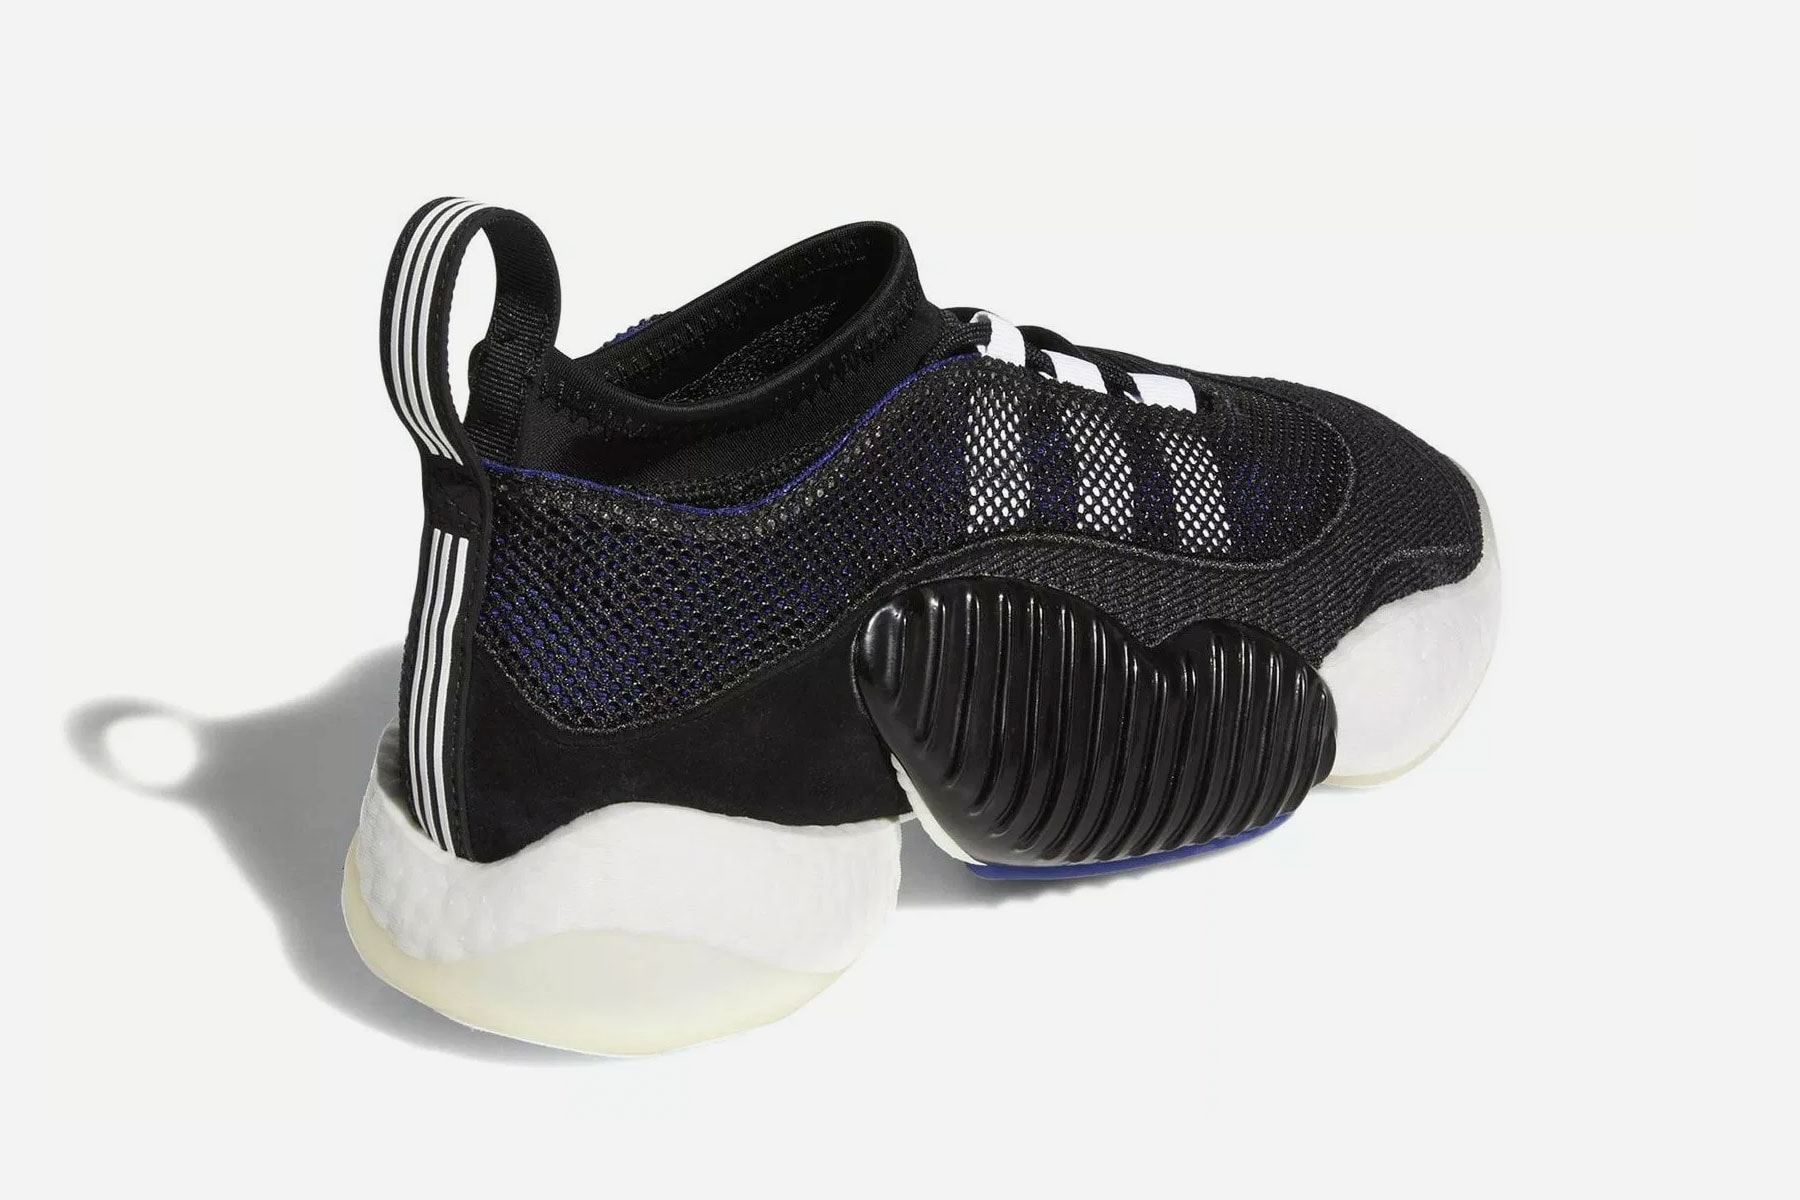 adidas Originals Crazy BYW LVL 2 first look black preview Sneakers Shoes Footwear BOOST release date